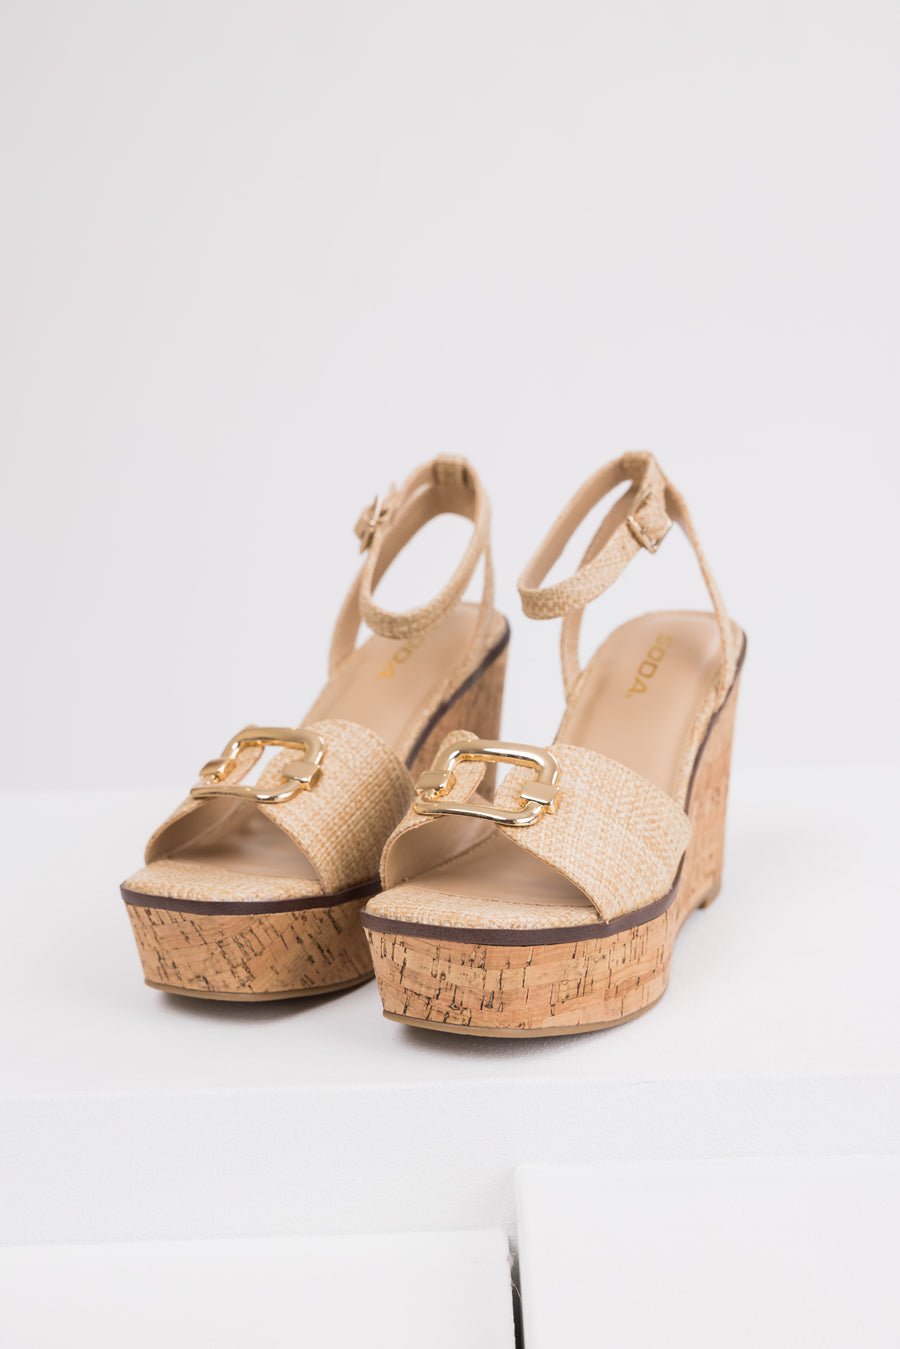 Beige Open Toe Wedges with Gold Buckle Detail